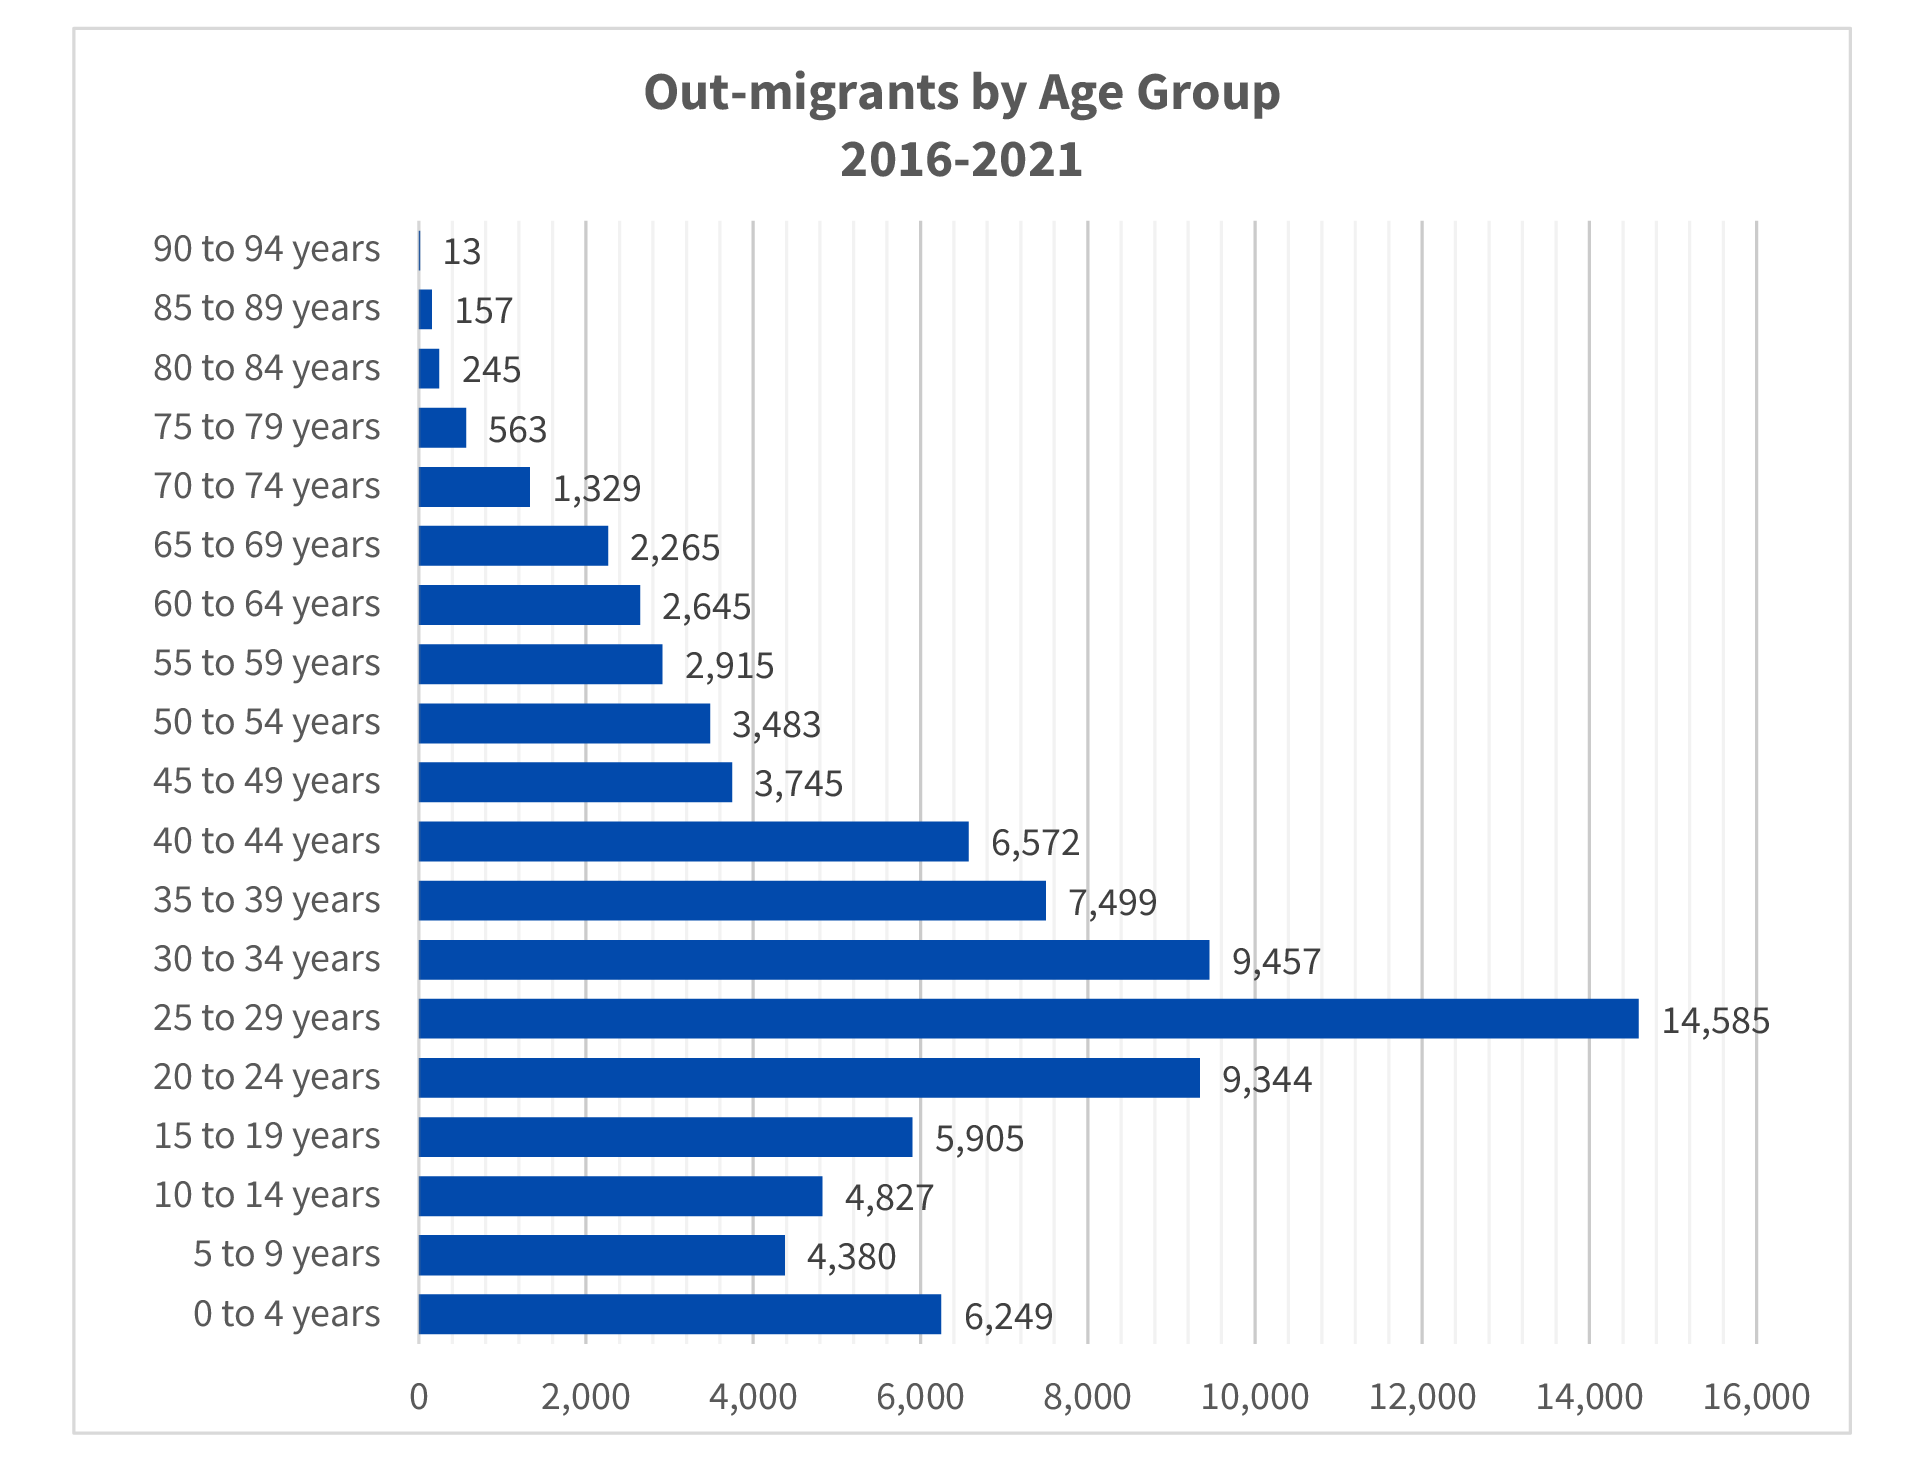 Bar graph showing out-migrants by age group 2016-2021